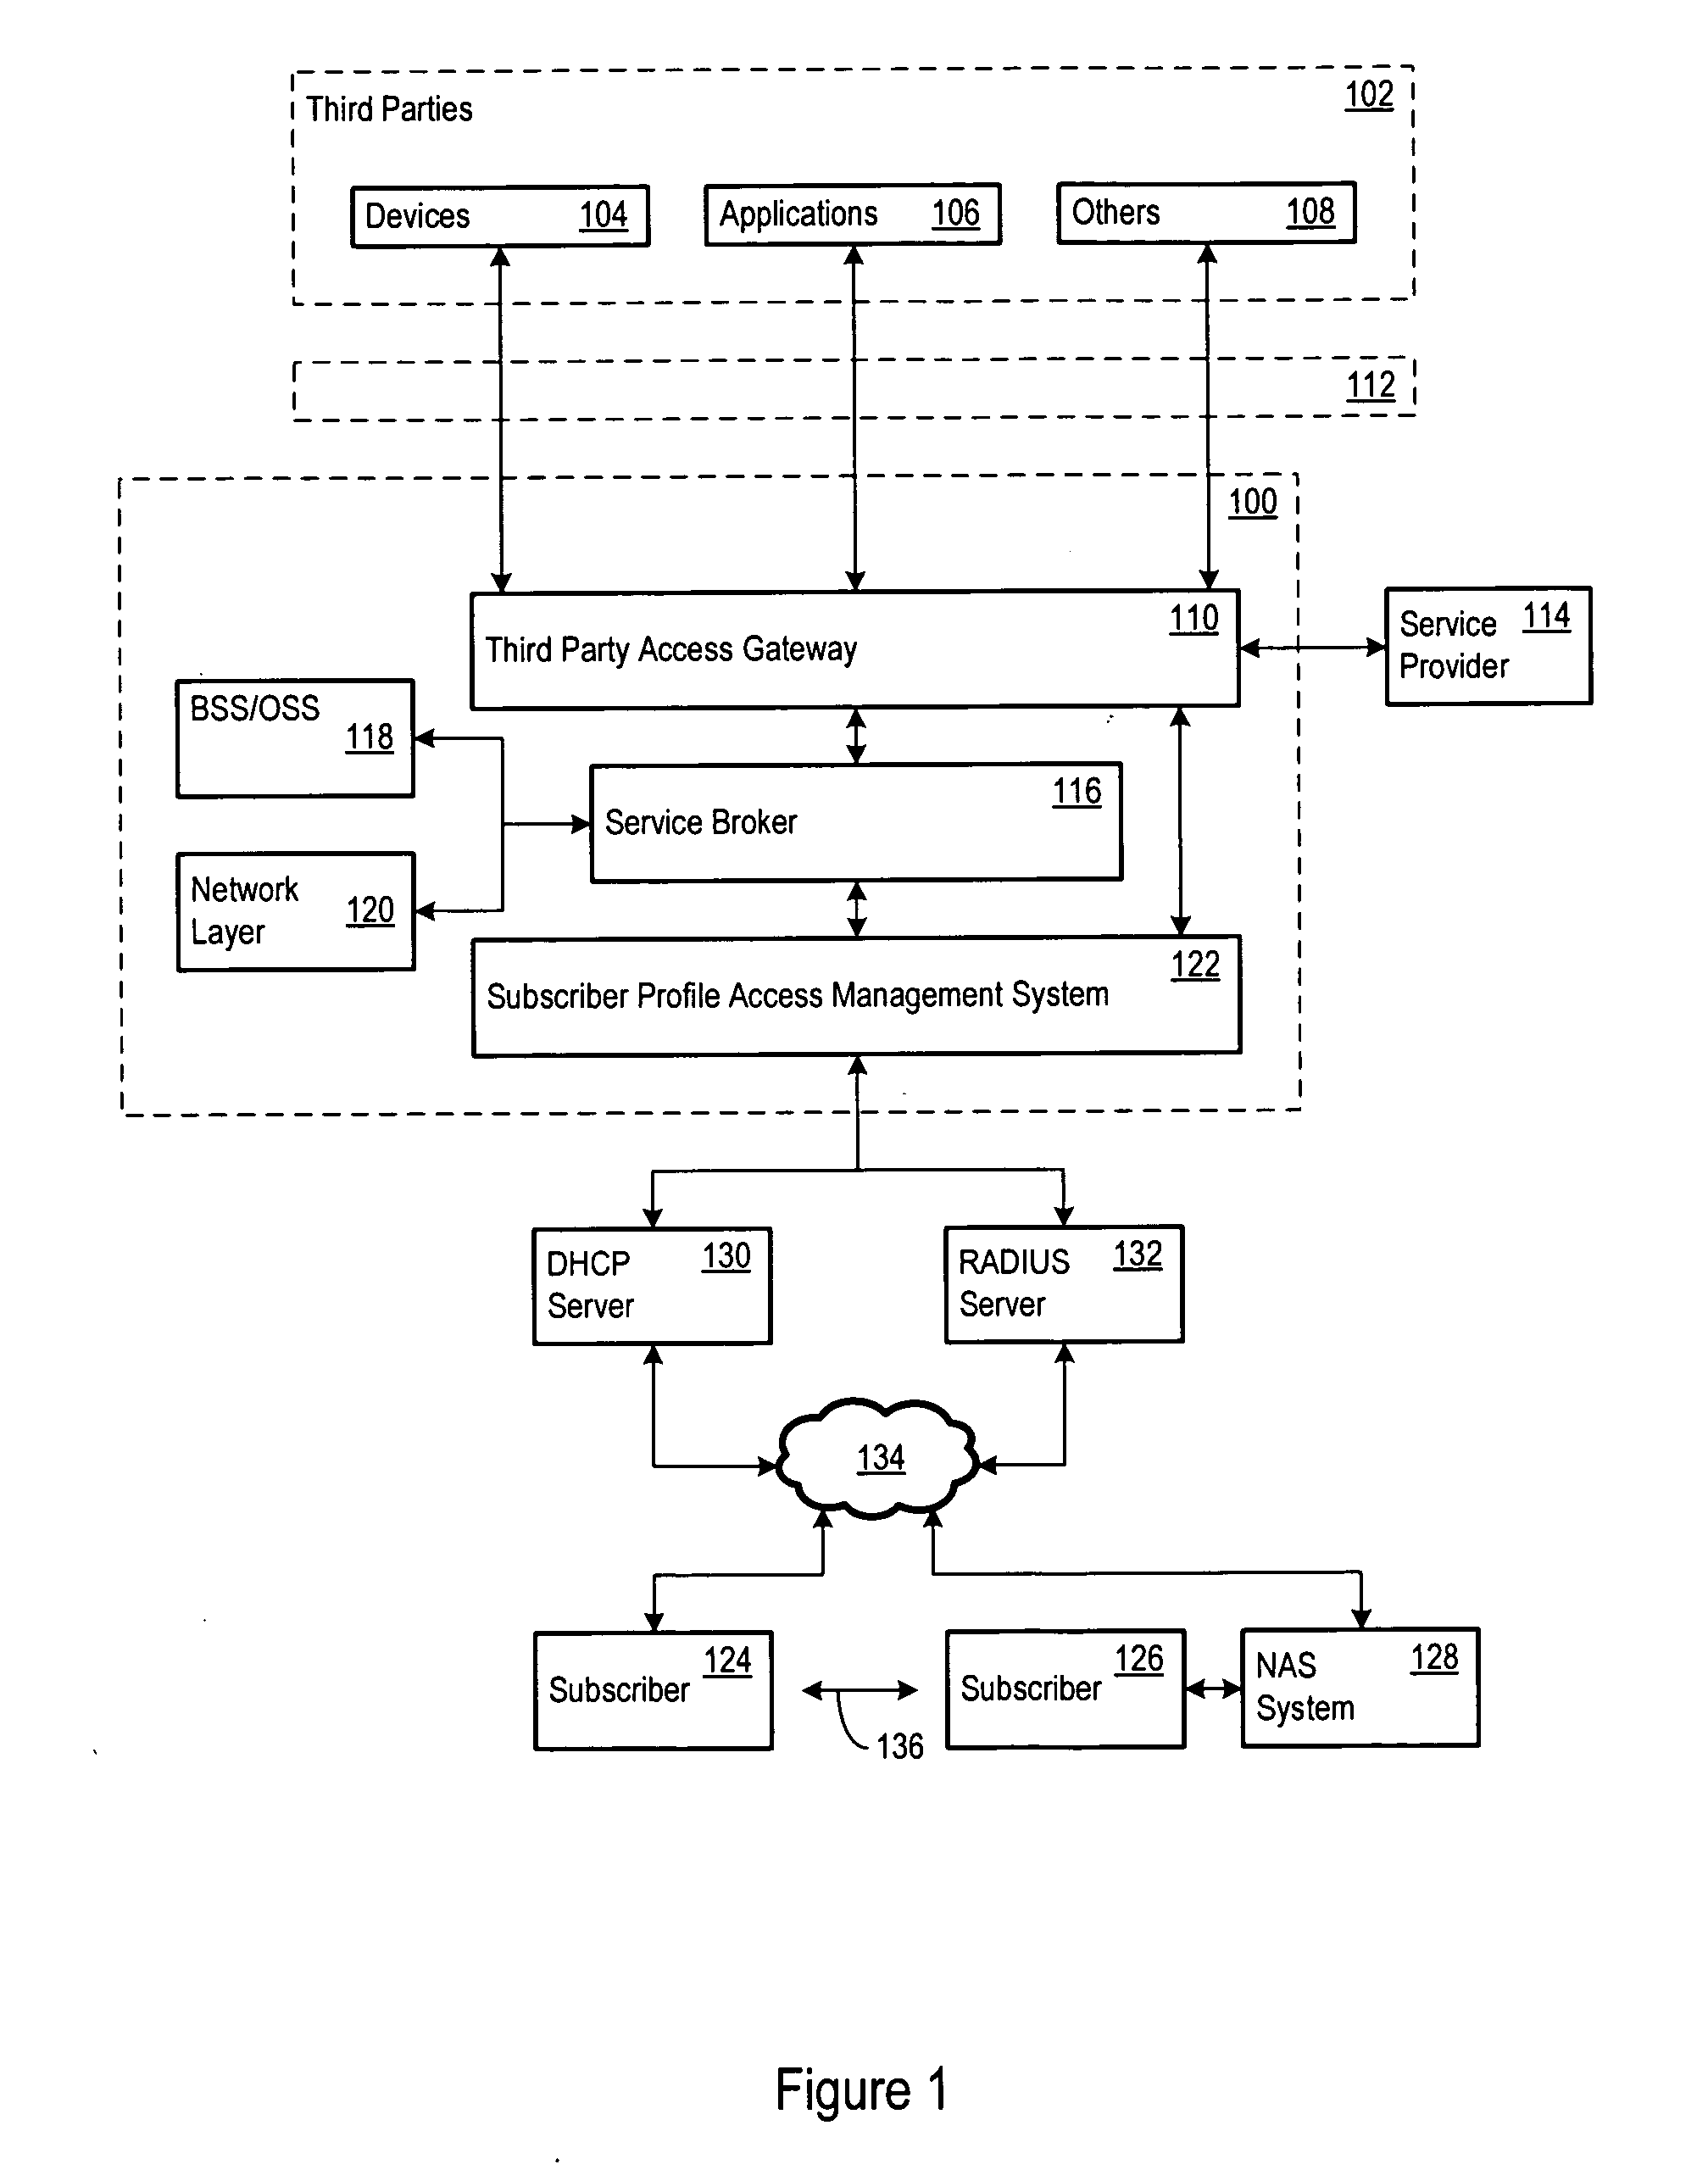 Unified directory and presence system for universal access to telecommunications services